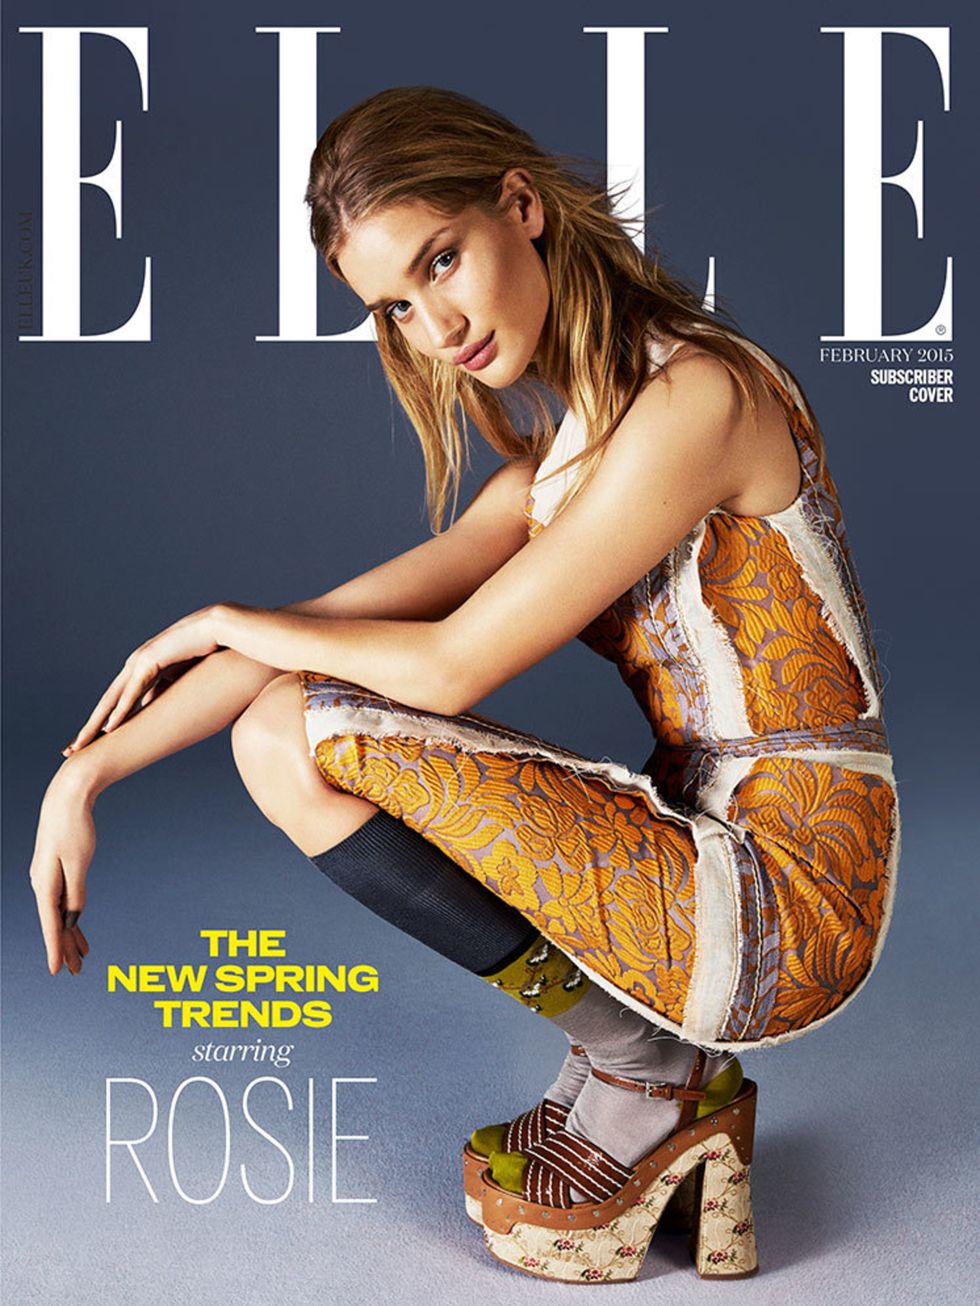 Rosie Huntington-Whiteley, subscriber cover, February 2015.